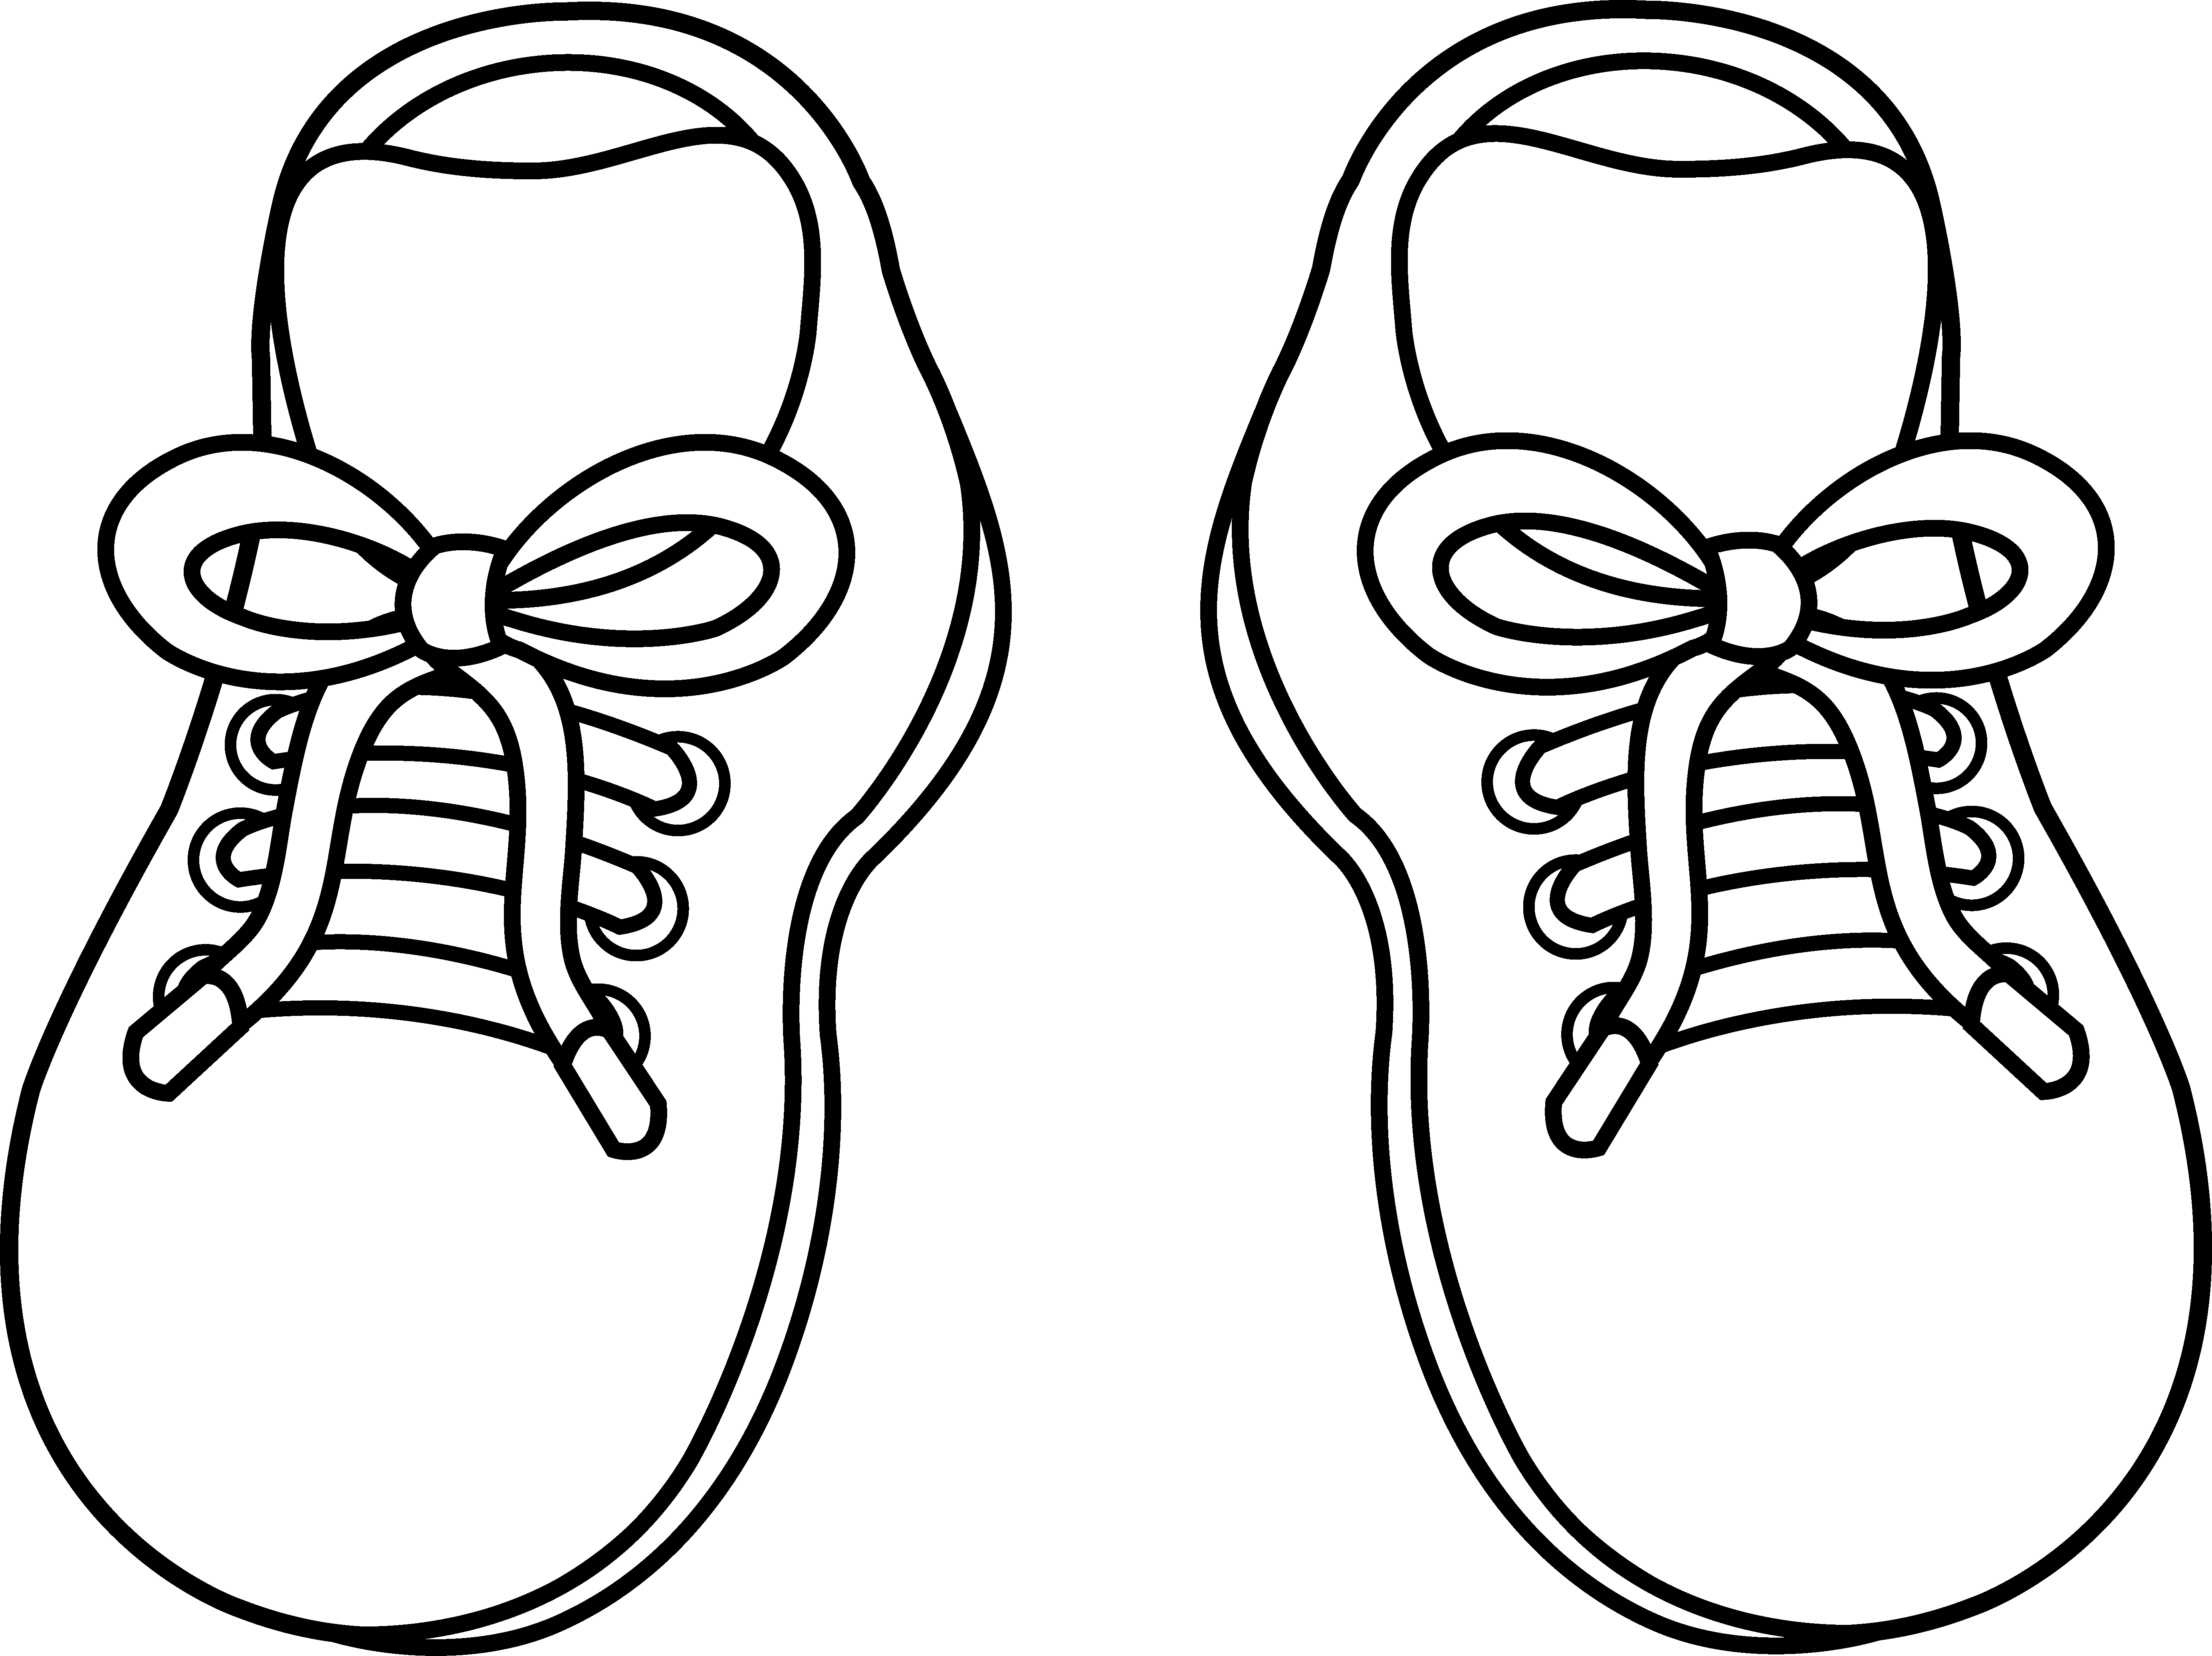 Pair of Childrens Shoes - Free Clip Art